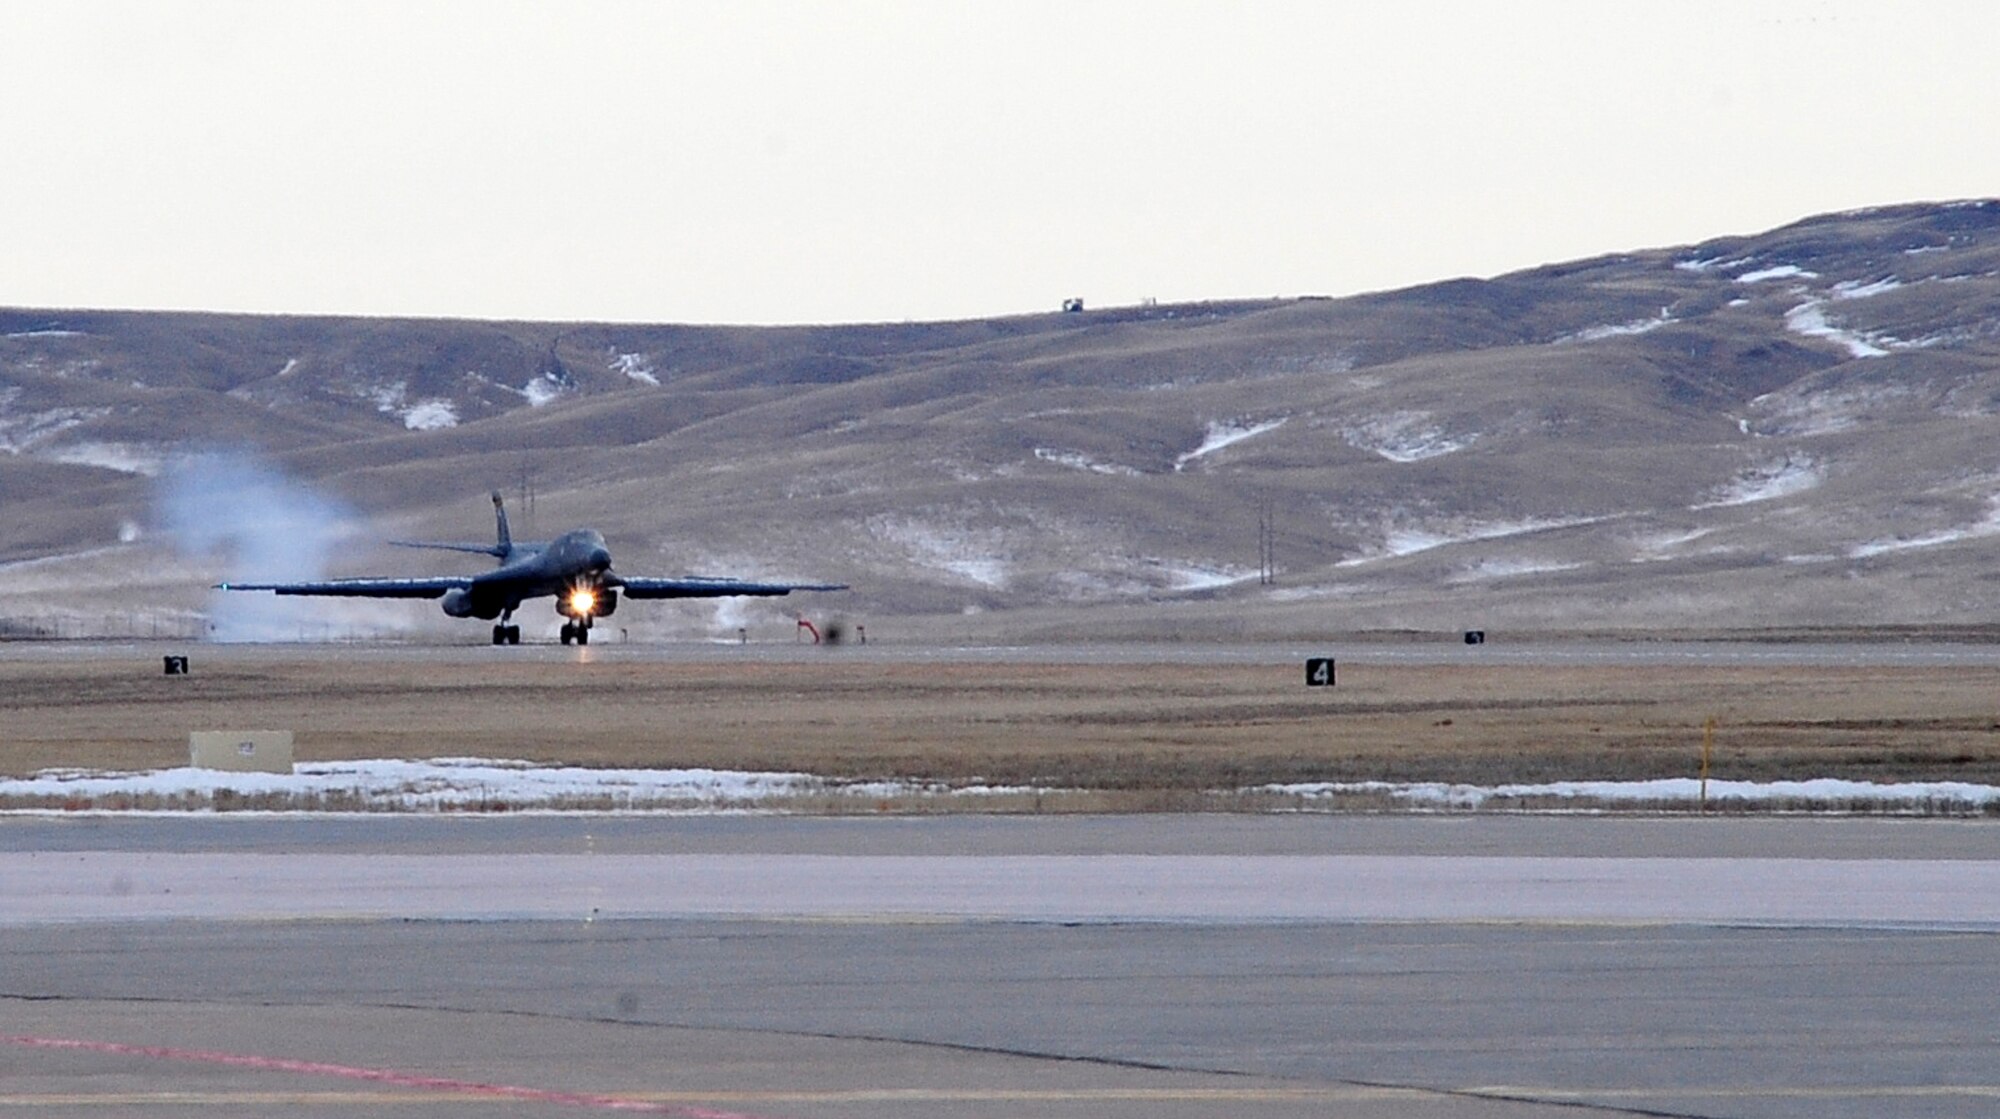 ELLSWORTH AIR FORCE BASE, S.D. -- A B-1B Lancer from the 37th Bomb Squadron lands after a six-month deployment in Southwest Asia, Jan. 26.  The B-1 can rapidly deliver massive quantities of precision and non-precision weapons against any adversary, anywhere in the world, at any time. (U.S. Air Force photo/Airman 1st Class Anthony Sanchelli)

